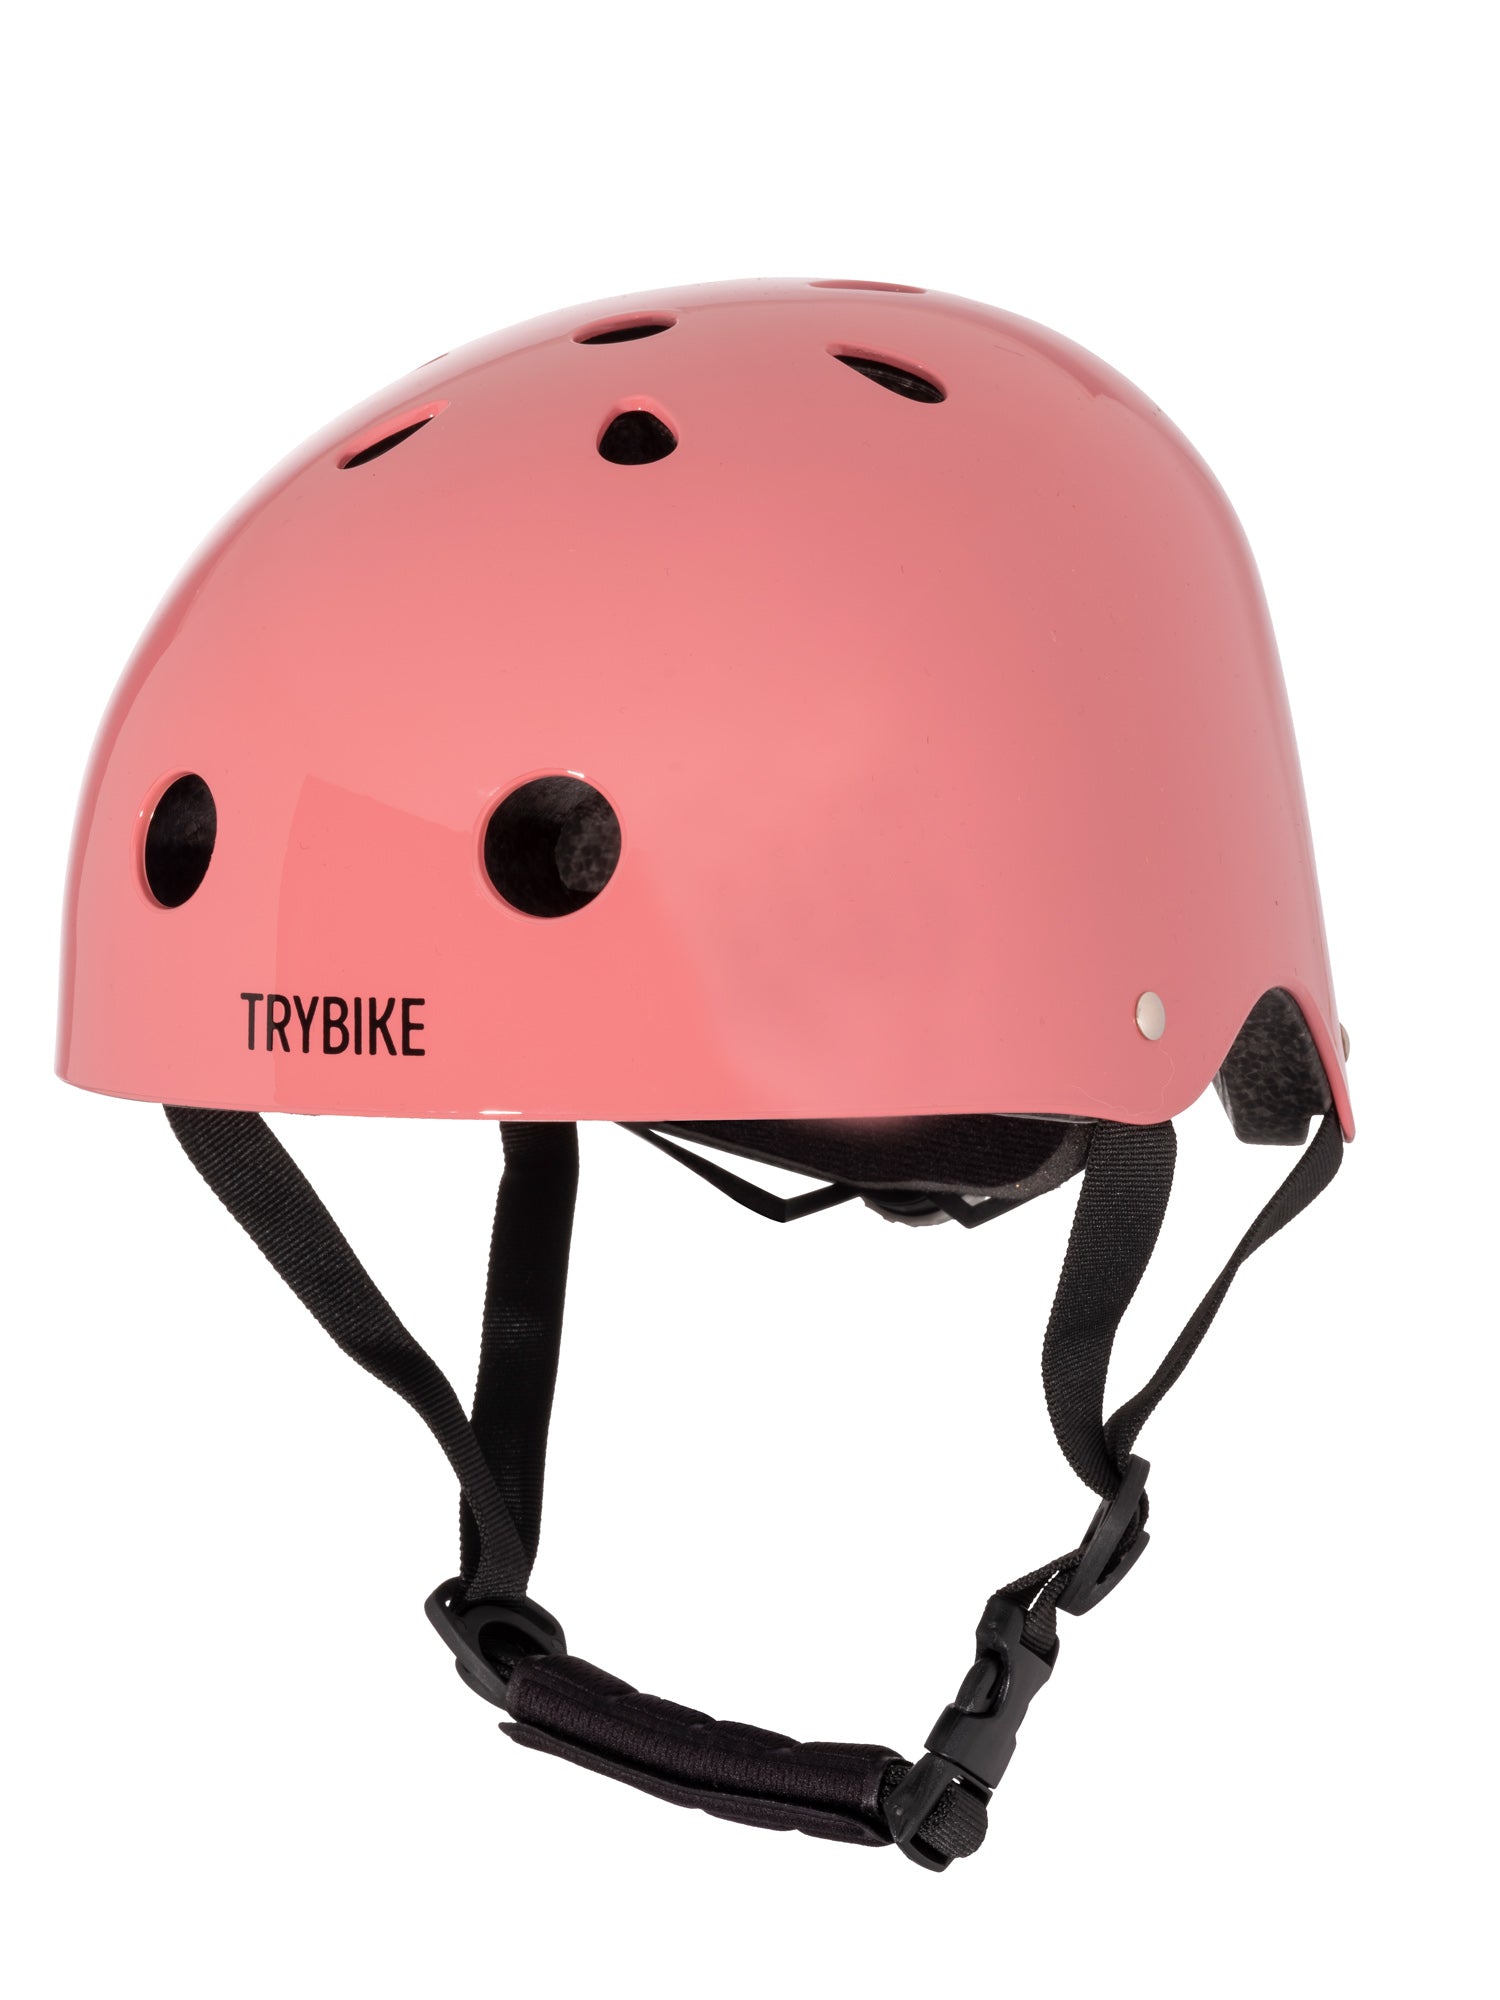 Casque Rose taille M - TRYBIKE CoCo11 S 8719189161366